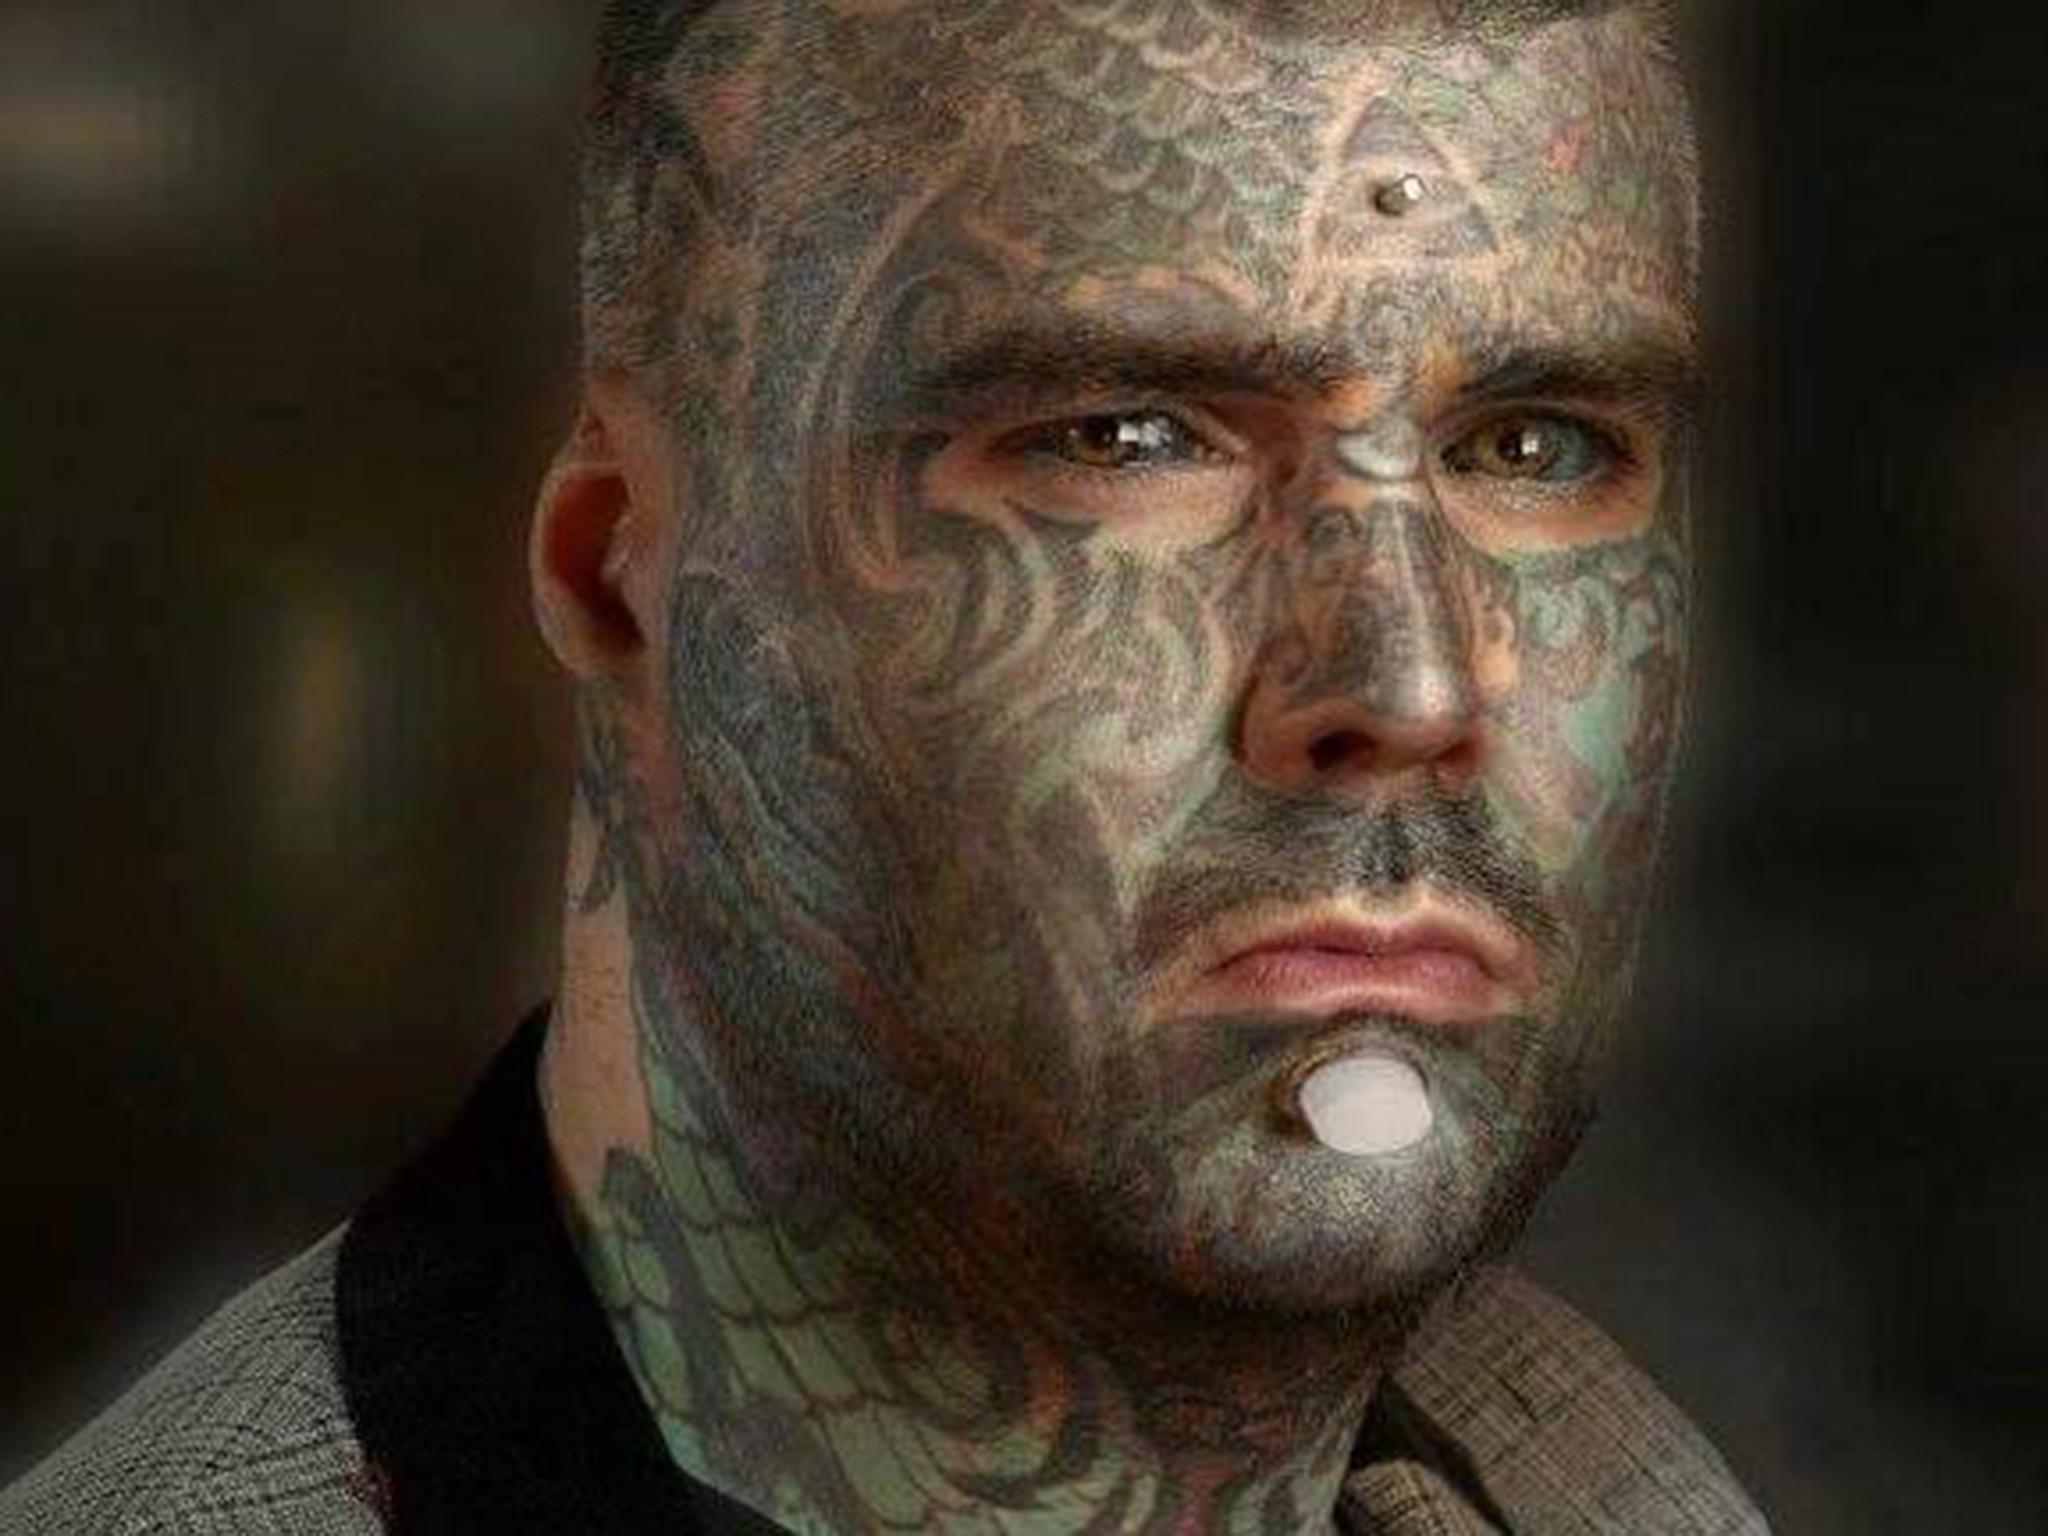 Body Art: UK's most tattoed man who dyed his eyes calls for equal treatment of people with modifications